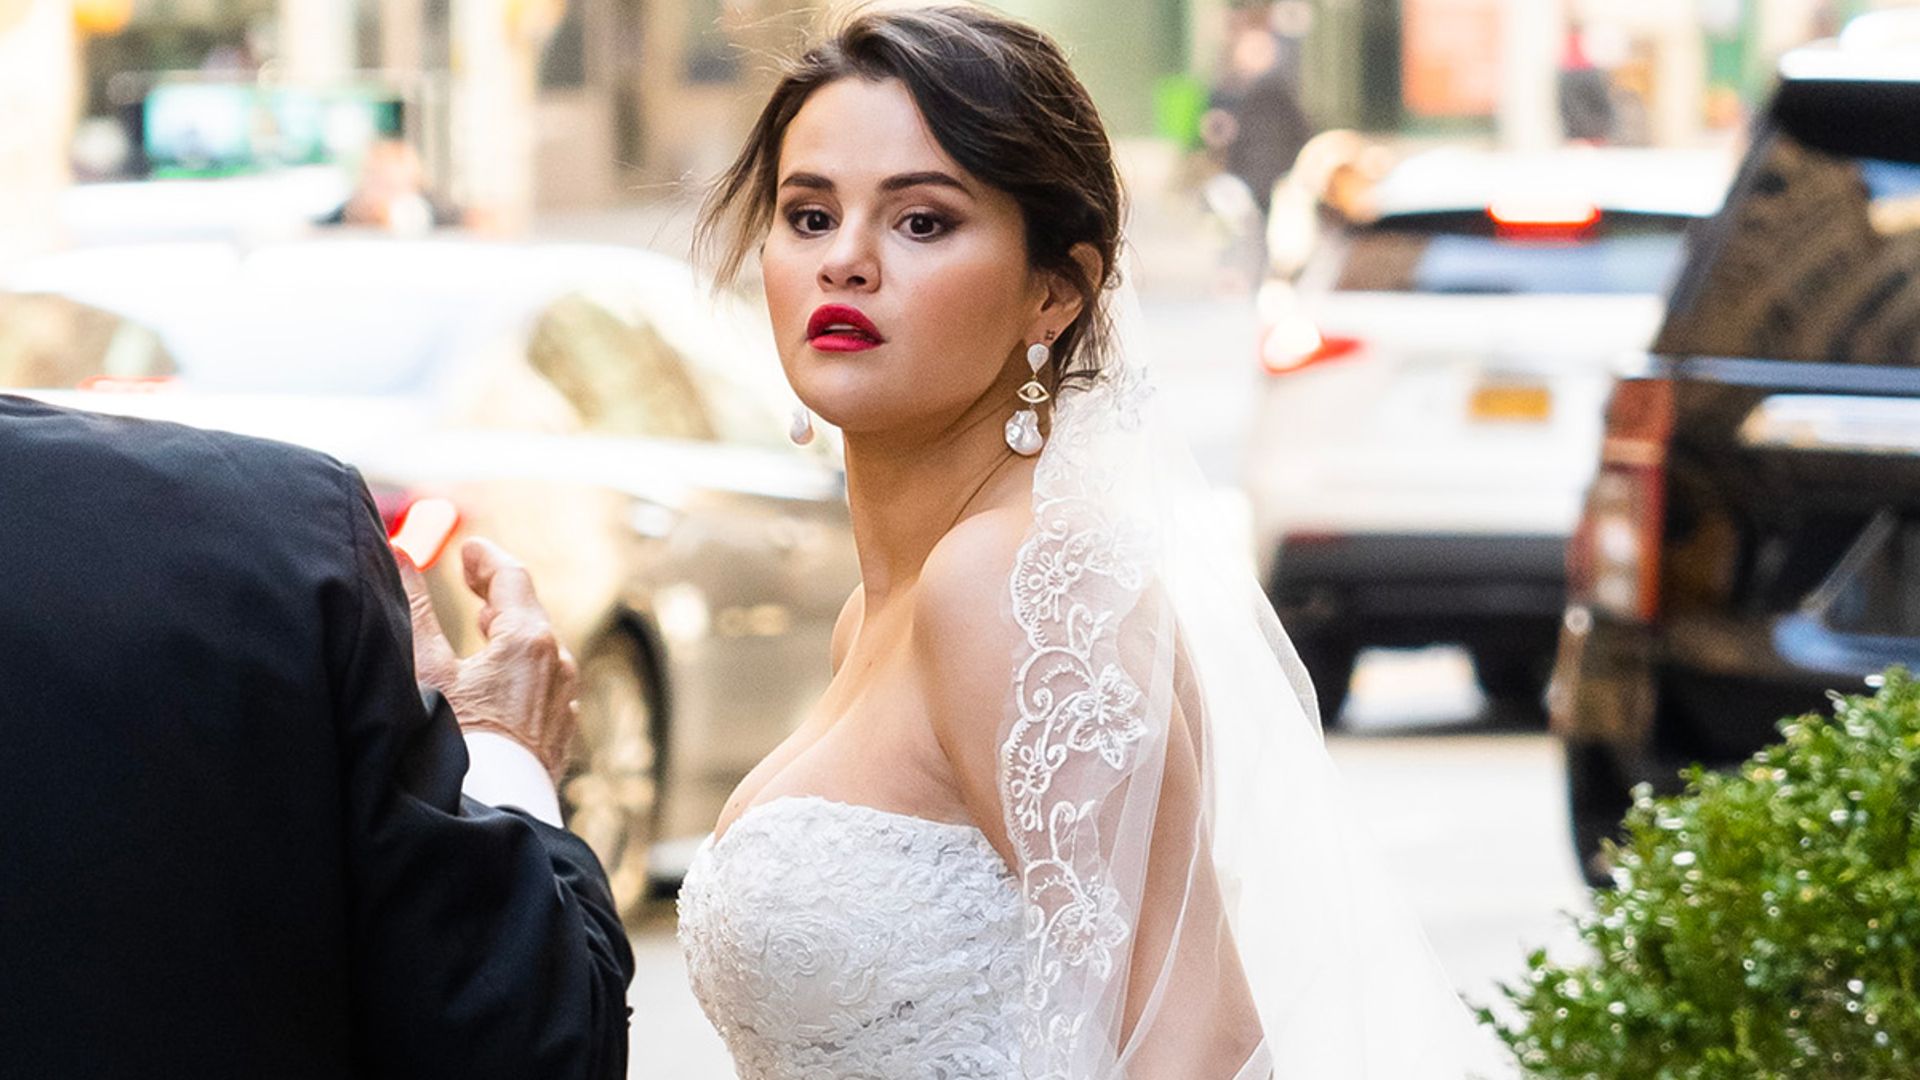 Selena Gomez just wore a wedding dress – but not for the reason you might expect